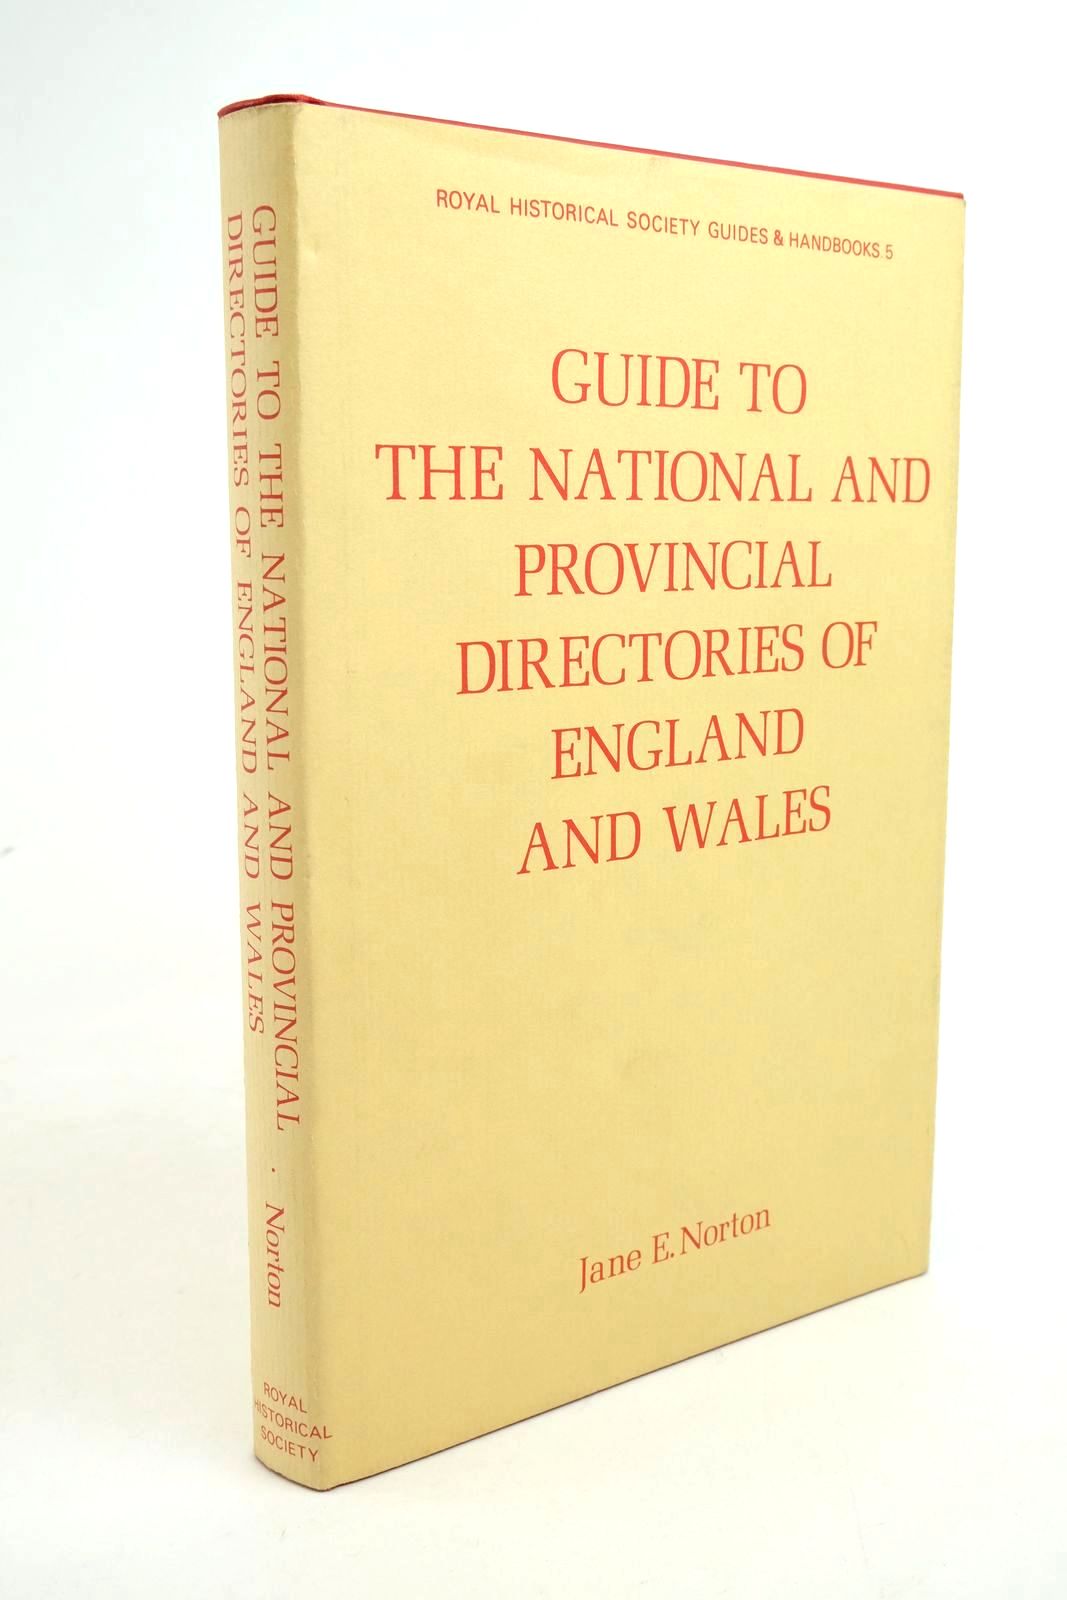 Photo of GUIDE TO THE NATIONAL AND PROVINCIAL DIRECTORIES OF ENGLAND AND WALES, EXCLUDING LONDON, PUBLISHED BEFORE 1856 written by Norton, Jane E. published by The Royal Historical Society (STOCK CODE: 1322439)  for sale by Stella & Rose's Books